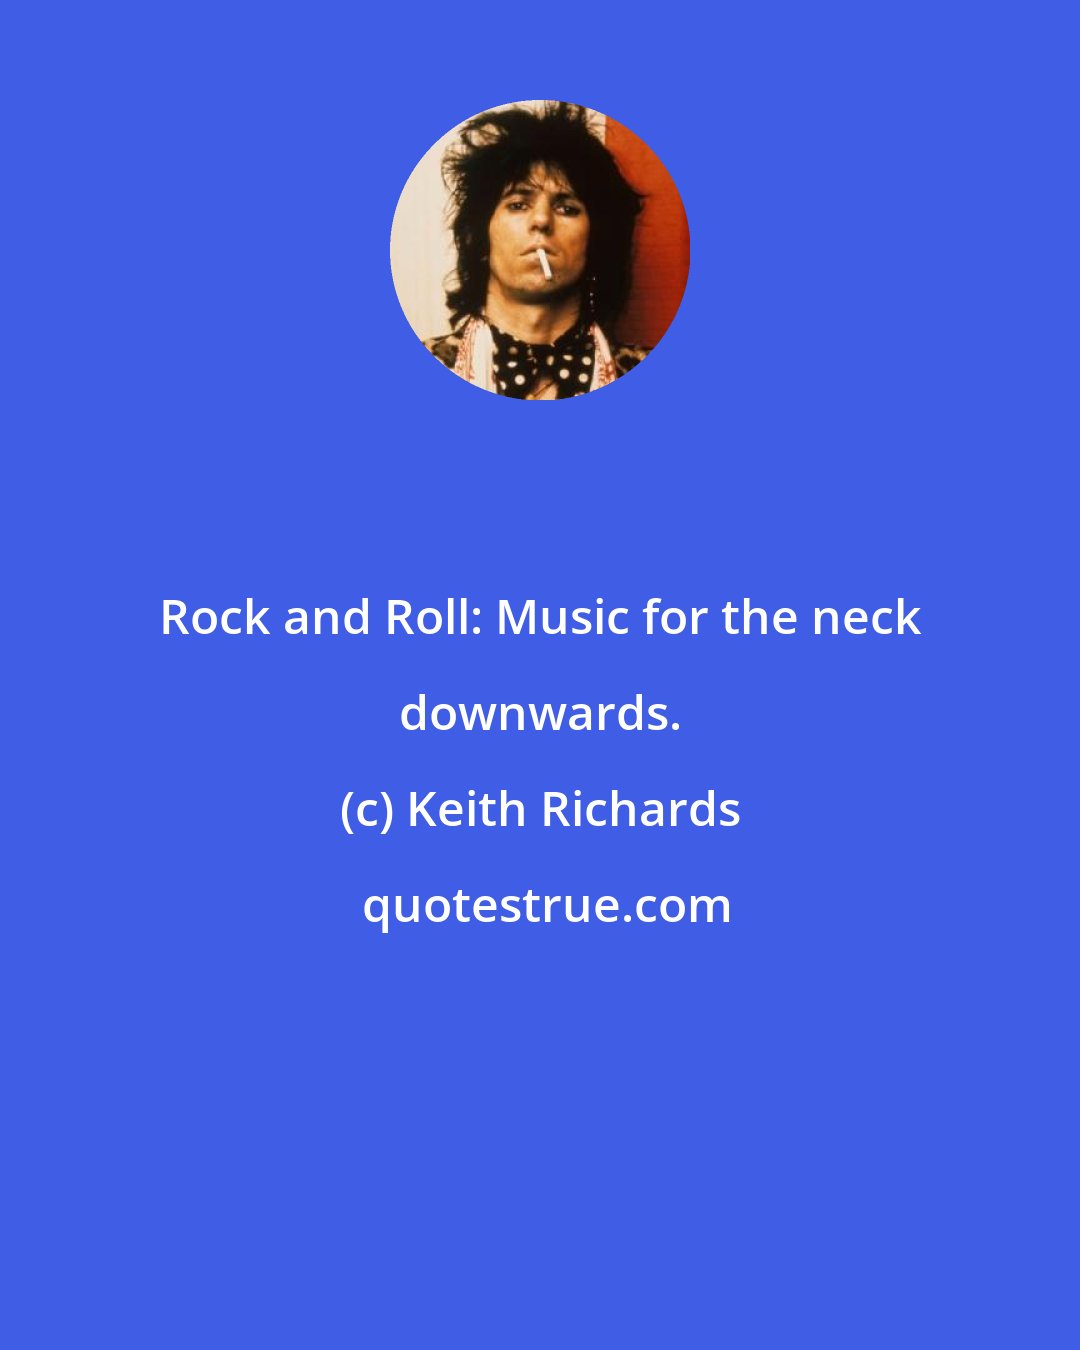 Keith Richards: Rock and Roll: Music for the neck downwards.